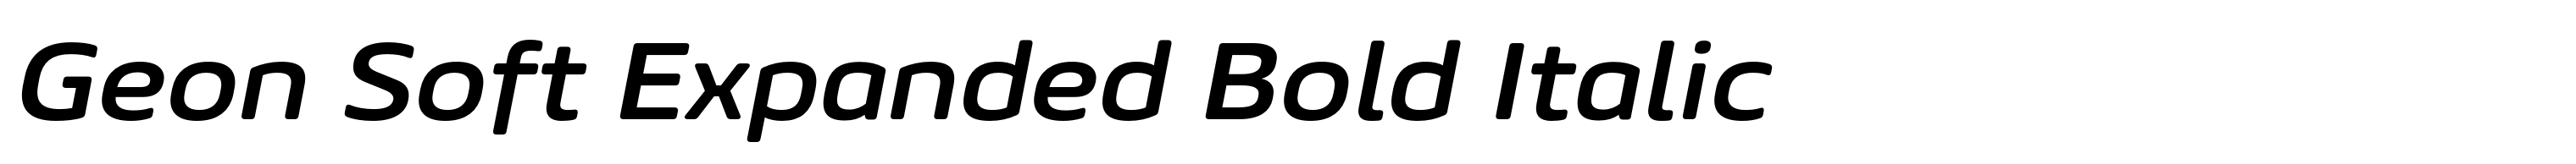 Geon Soft Expanded Bold Italic